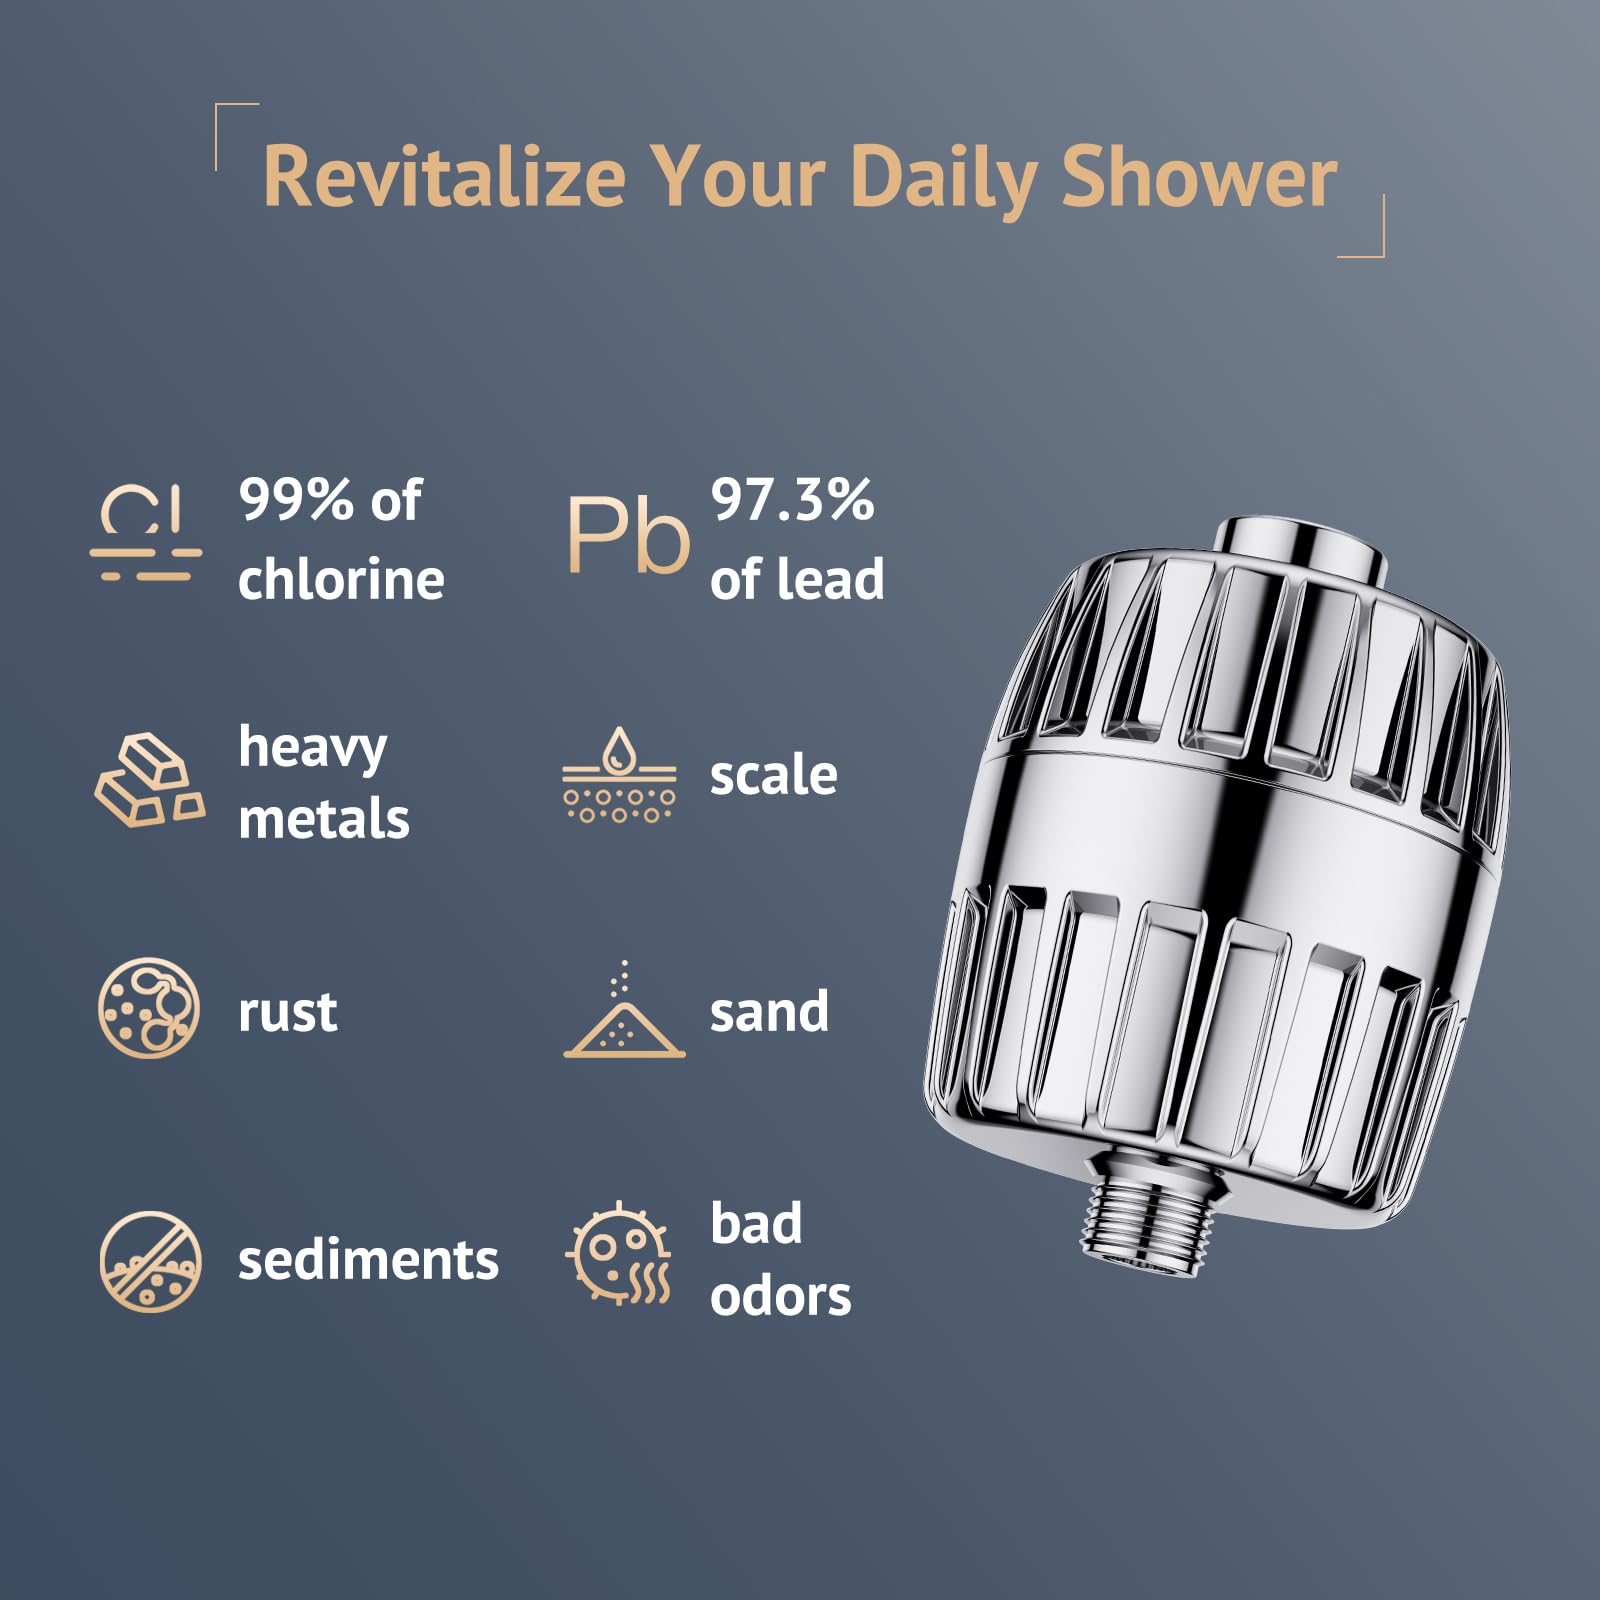 Kintim Shower Filter for Hard Water Features Full Pressure, Clog-Proof Shower Water Filter with 304 Stainless Threads, Removes Chlorine and Fluoride, Revitalize Dry, Itchy Skin and Brittle Hair